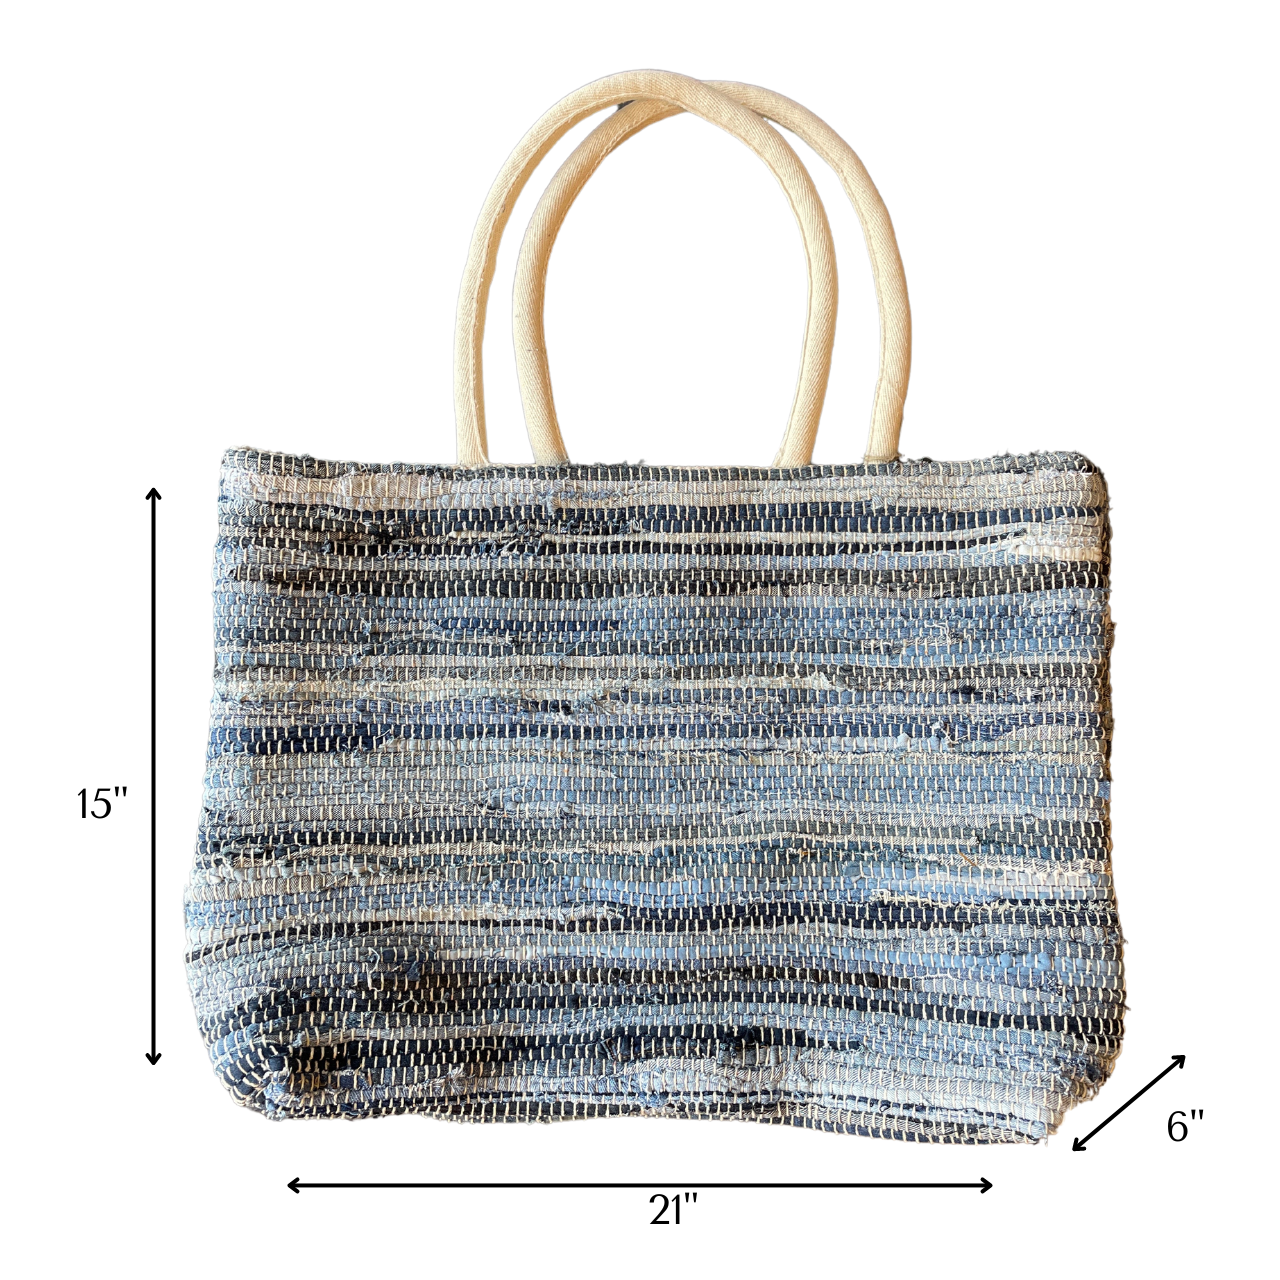 This tote is the ultimate workhorse of totes, using eco-friendly materials and repurposed clothes! It's a rugged bag that will outlast its owner!  Measures 15" tall x 21" wide 6"